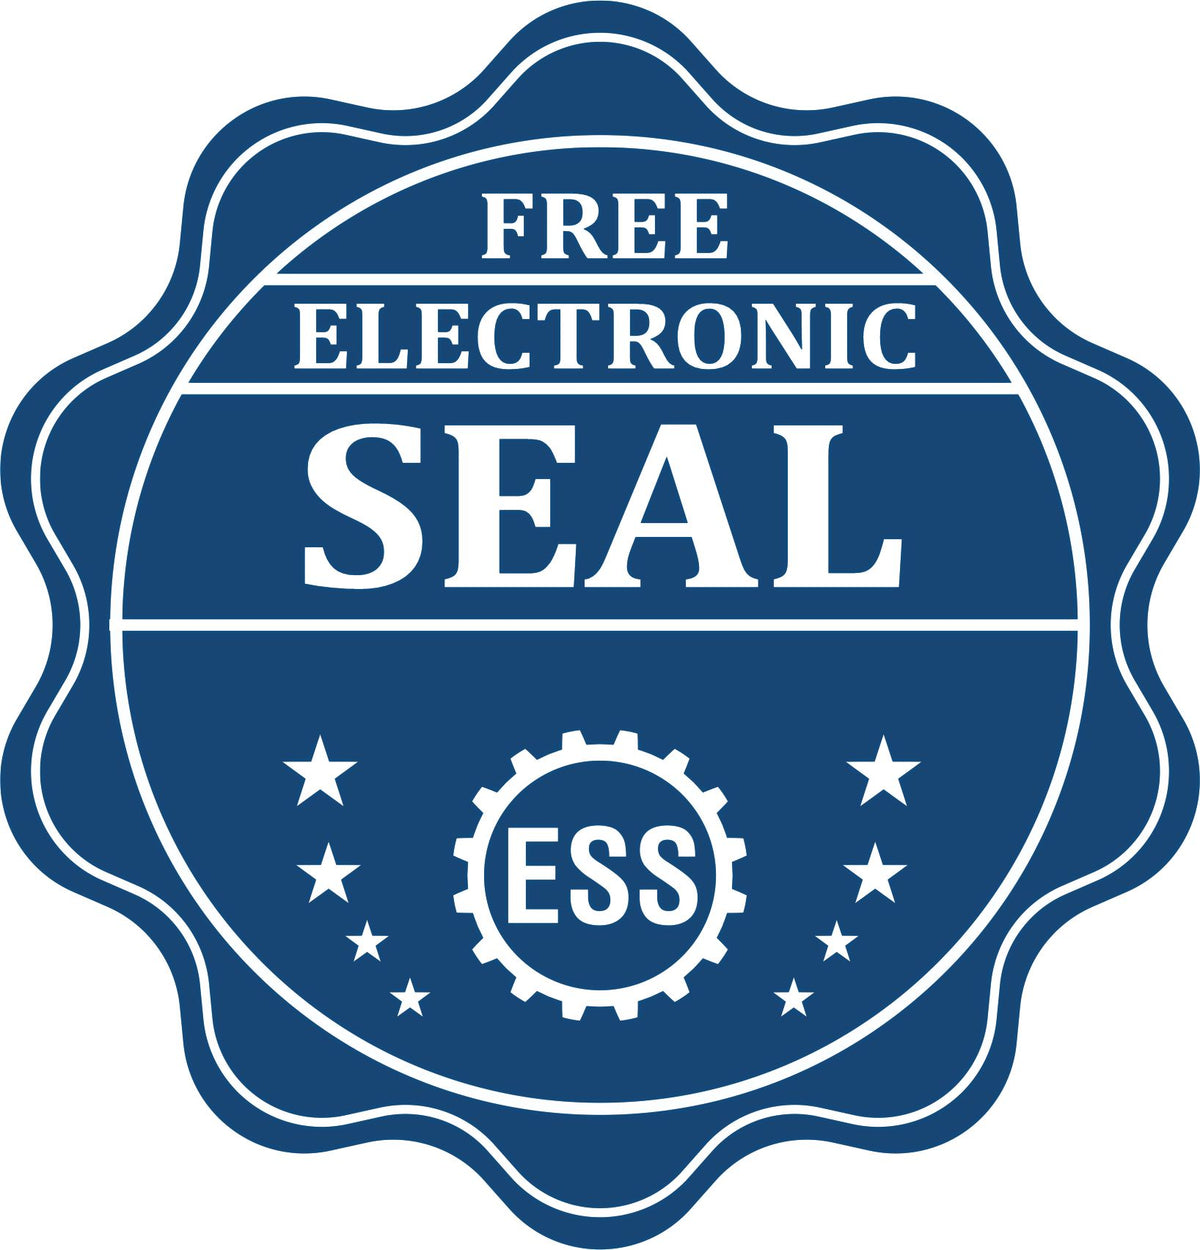 A badge showing a free electronic seal for the State of Nebraska Extended Long Reach Engineer Seal with stars and the ESS gear on the emblem.